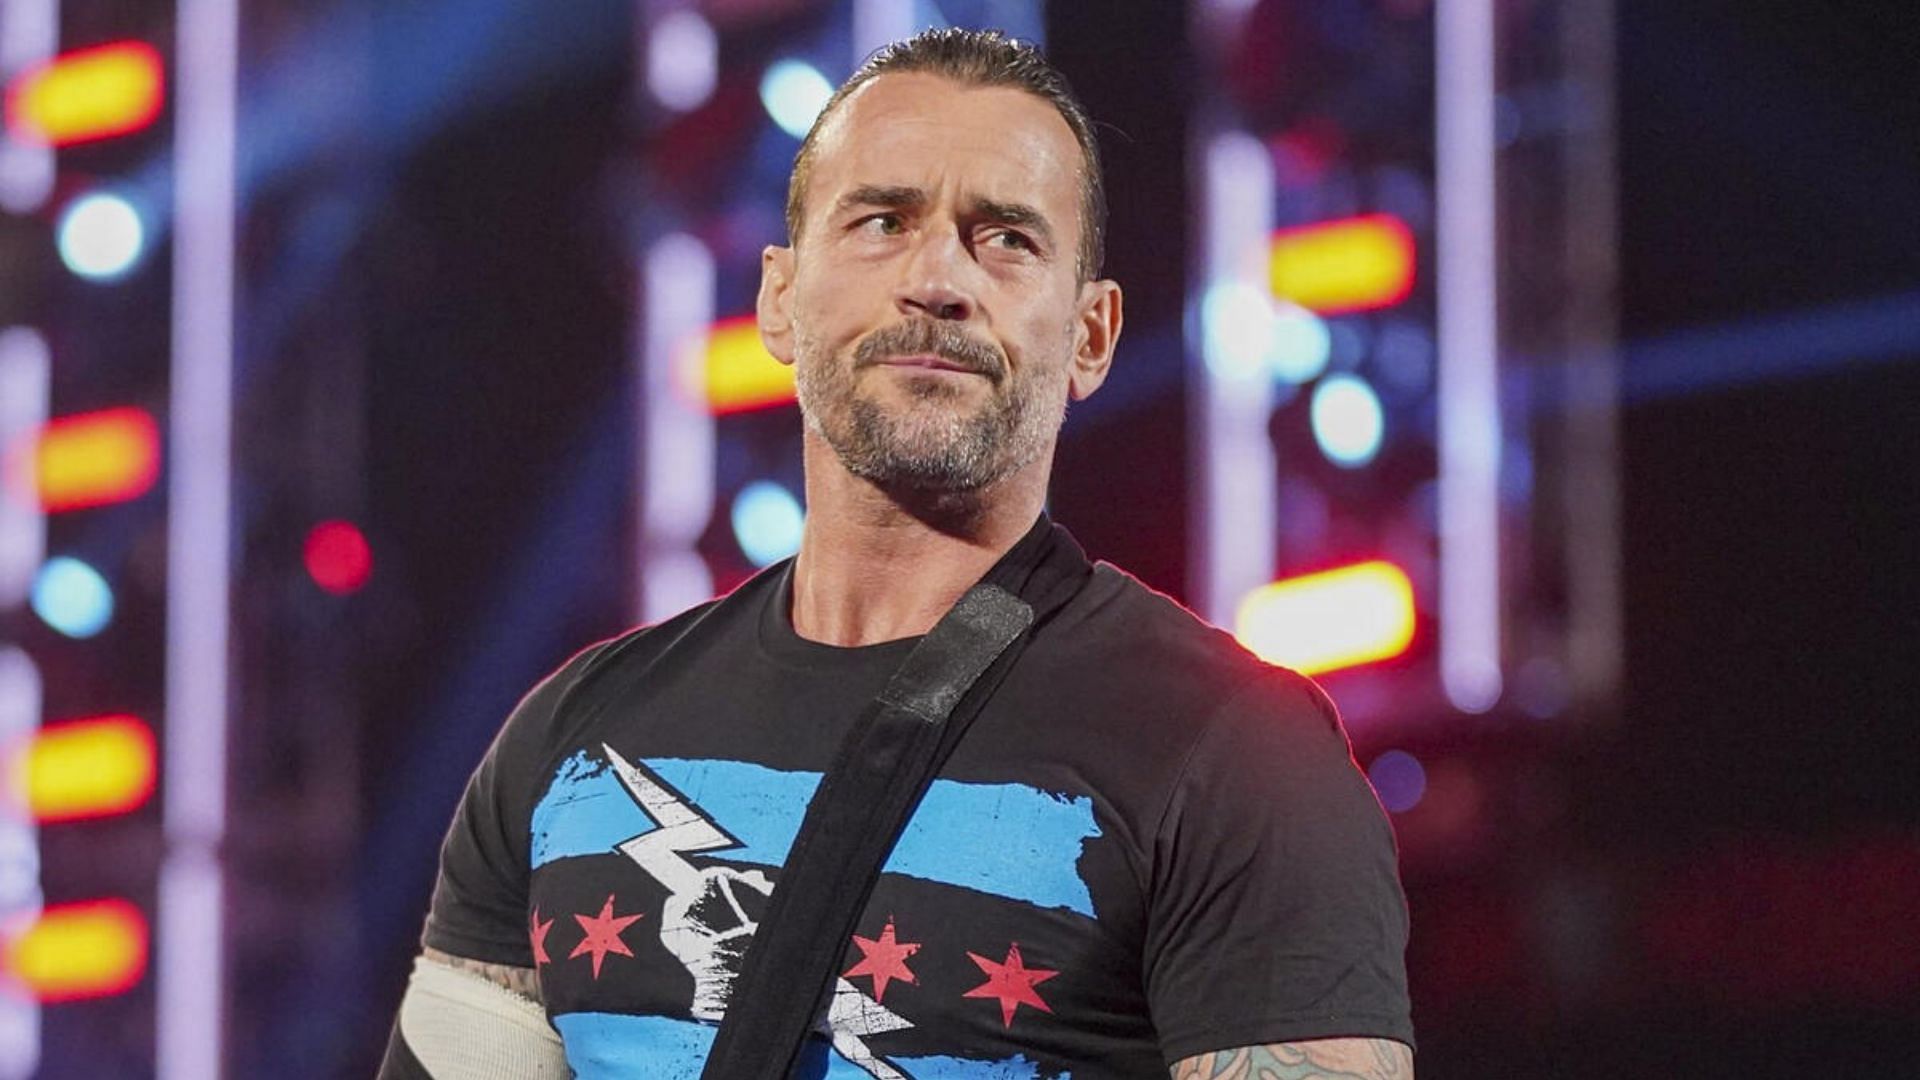 CM Punk will return to WWE programming on the upcoming episode of RAW